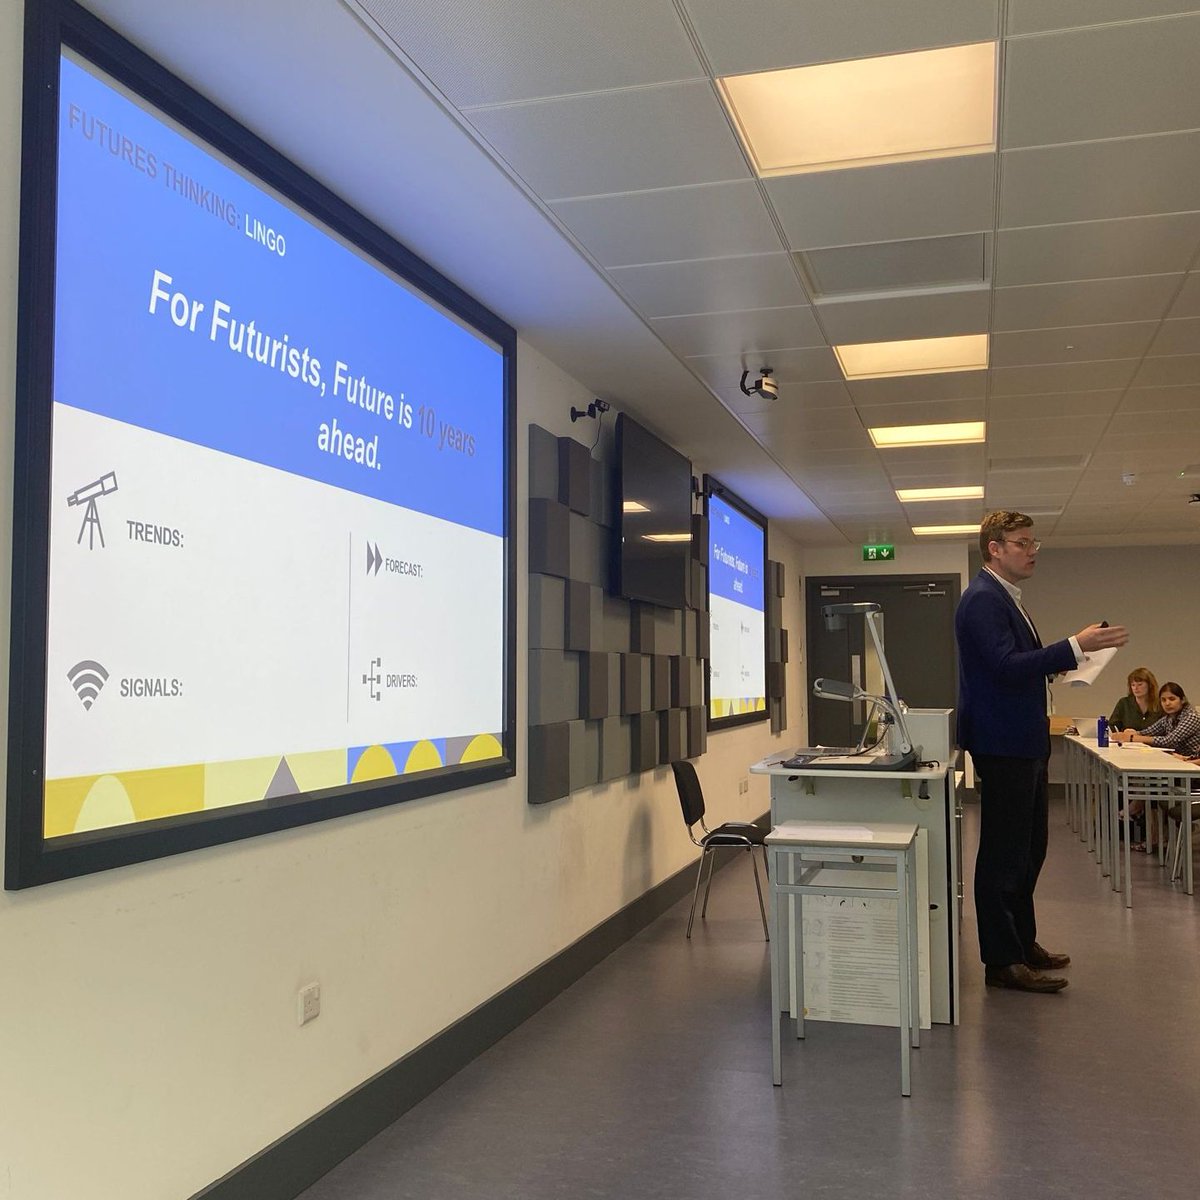 #Futuresthinking is a systematic approach to exploring and understanding potential future scenarios and trends. 

Chris our @dcu L&OD Specialist presents to staff on our FUTURES THINKING course yesterday.

The first of a 3-part series!

More here 👇
dcu.ie/hr/dcu-events/…